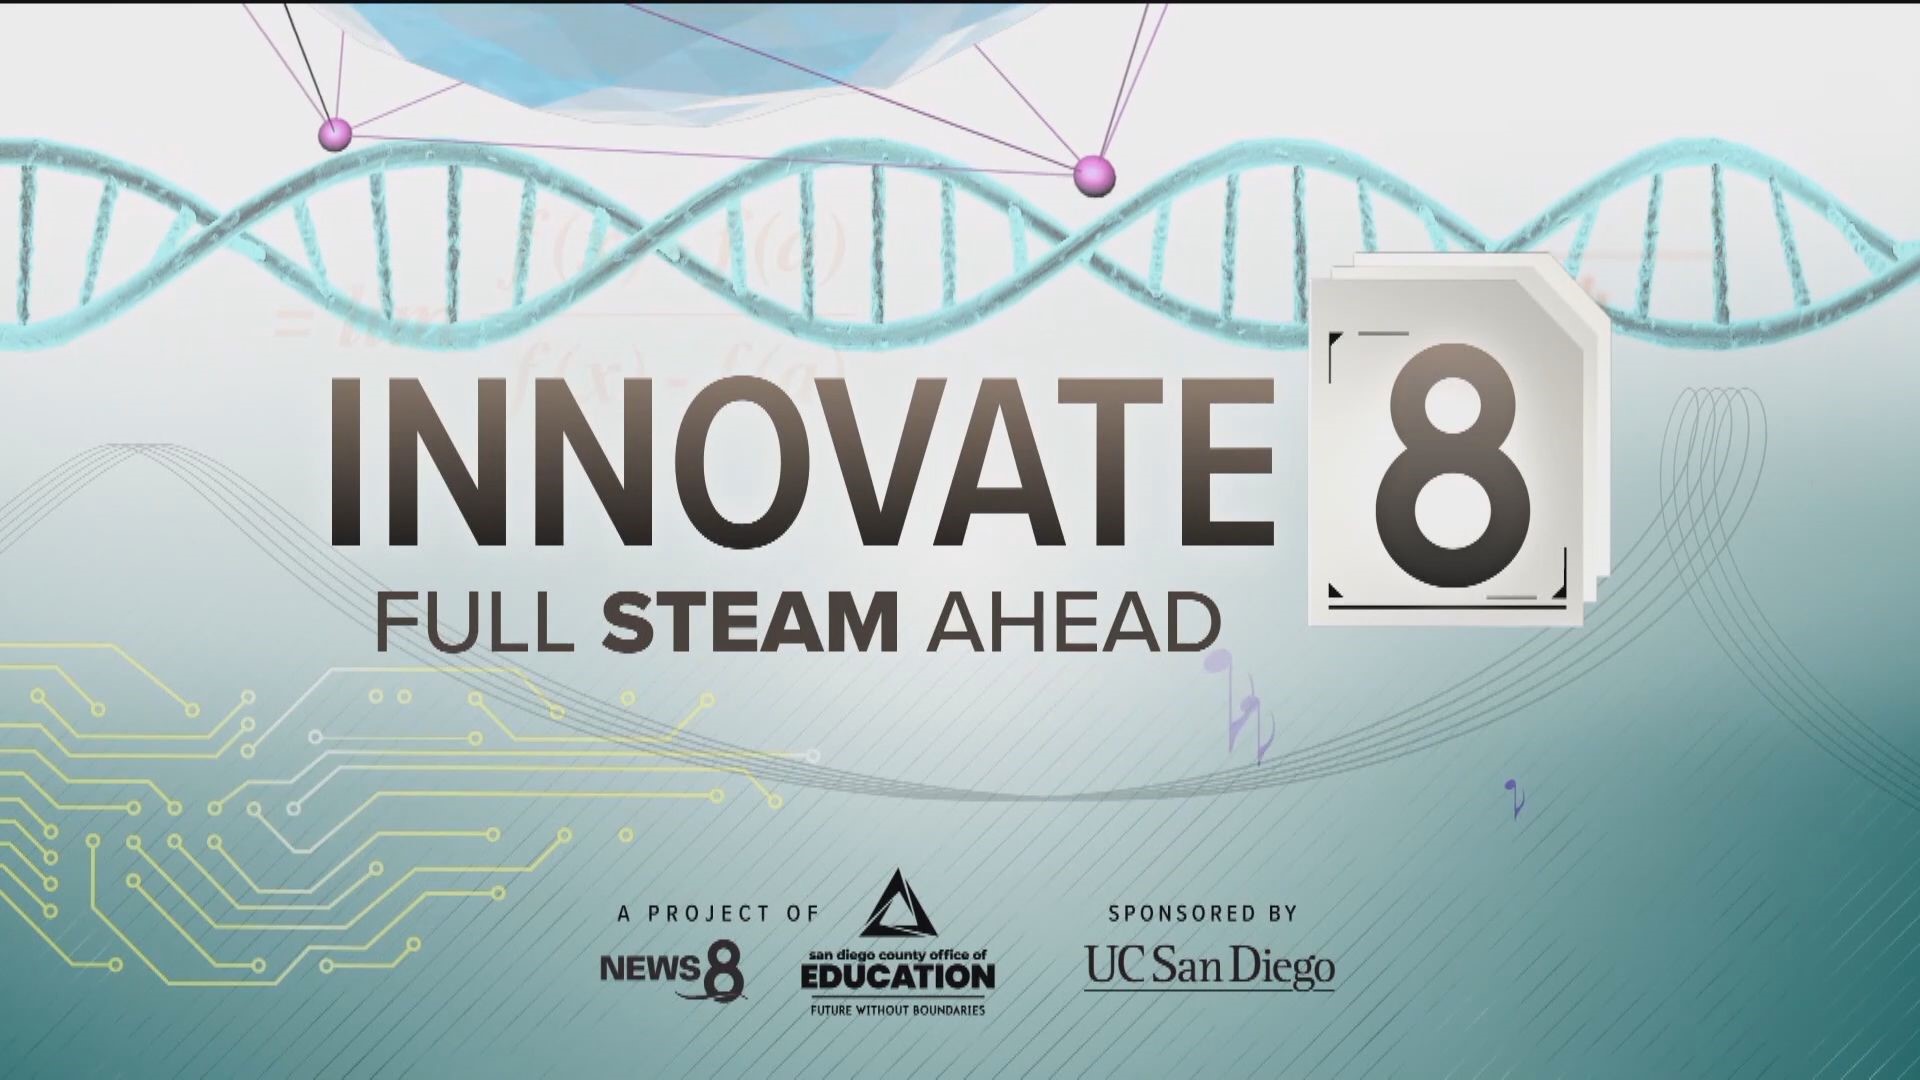 A News 8 special that takes a look at STEAM learning (Science, Technology, Engineering, Arts, Math) in San Diego.